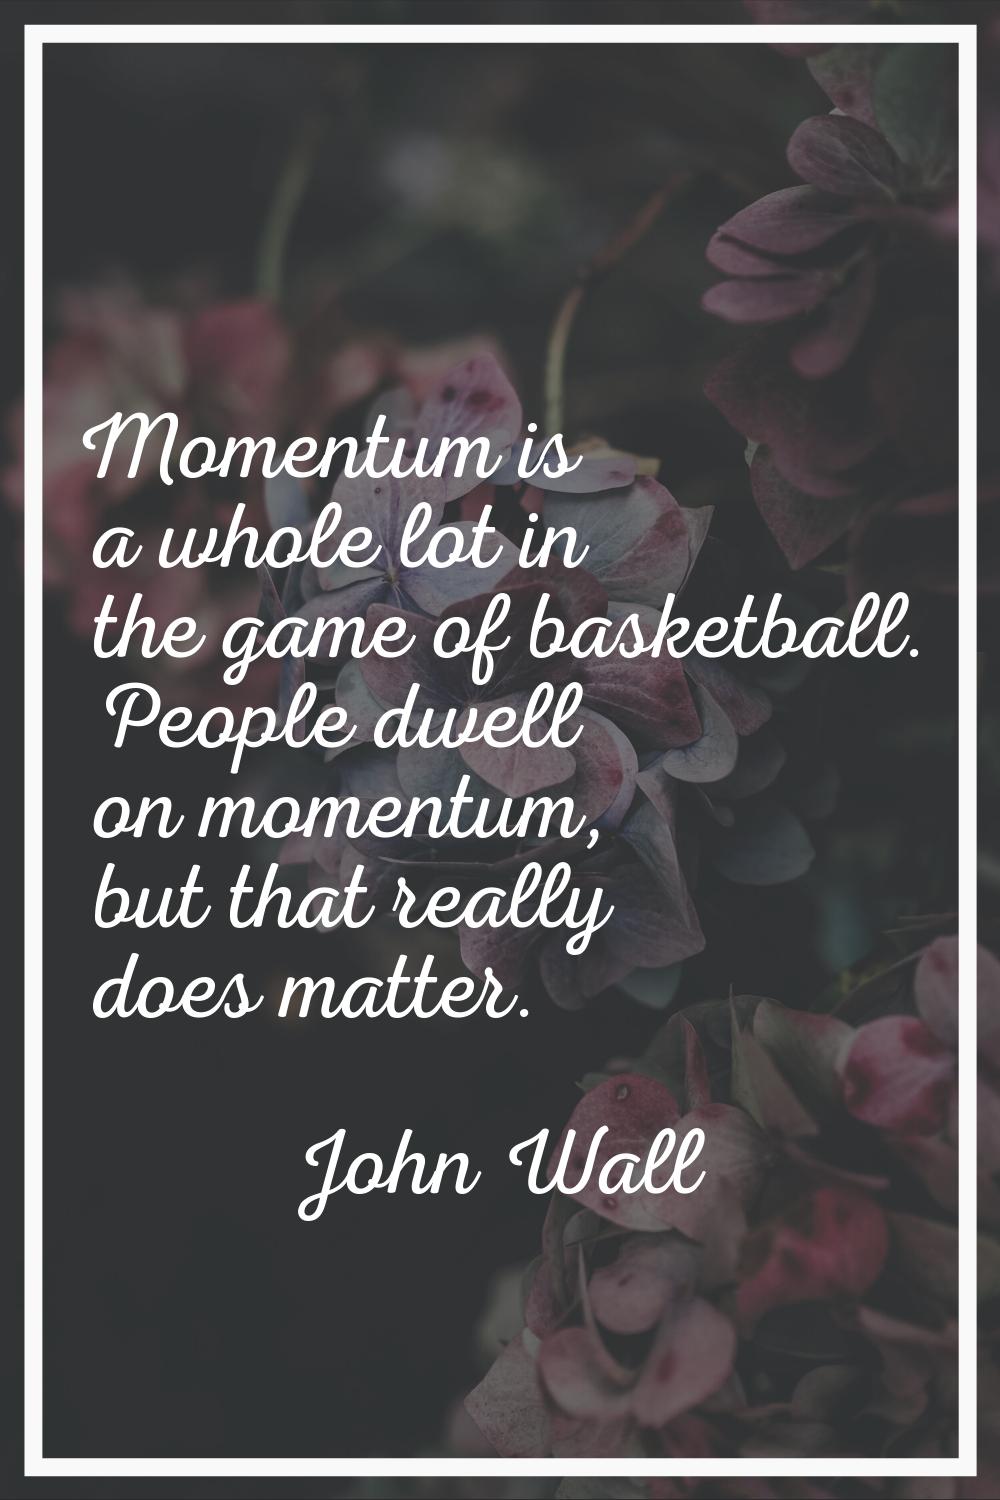 Momentum is a whole lot in the game of basketball. People dwell on momentum, but that really does m